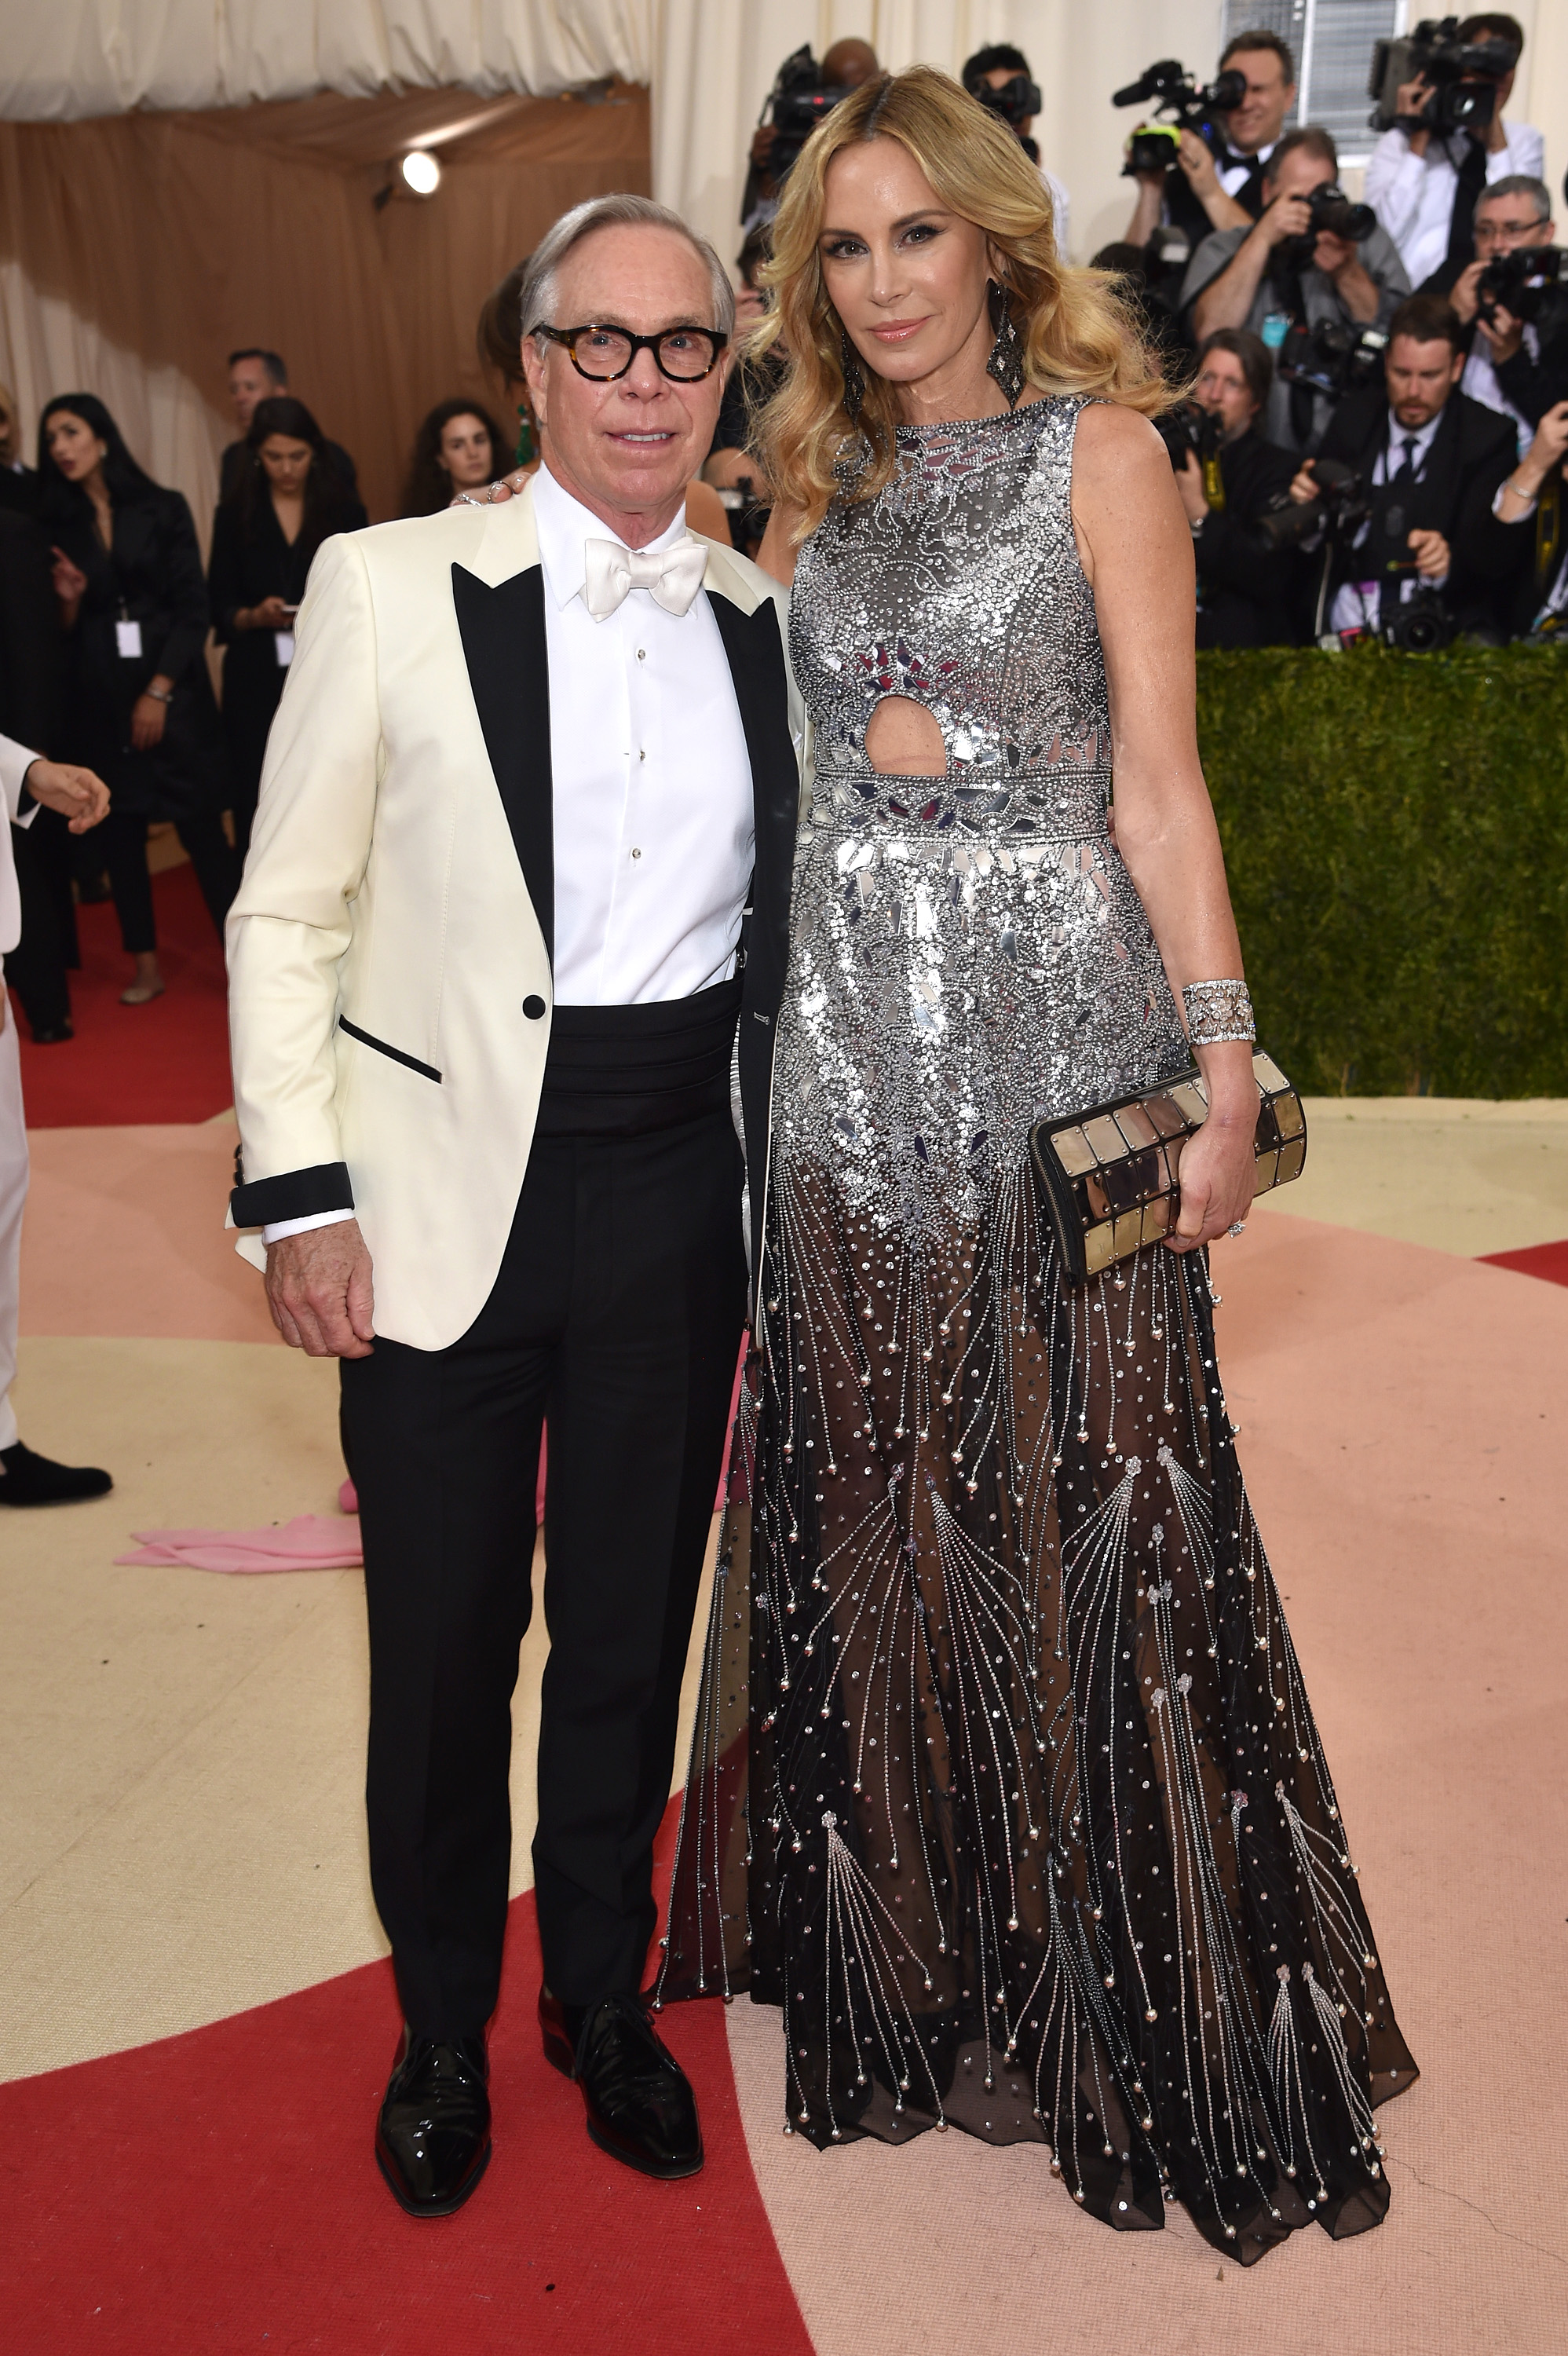 Tommy Hilfiger and Dee Ocleppo attend "Manus x Machina: Fashion In An Age Of Technology" Costume Institute Gala at Metropolitan Museum of Art on May 2, 2016 in New York City.